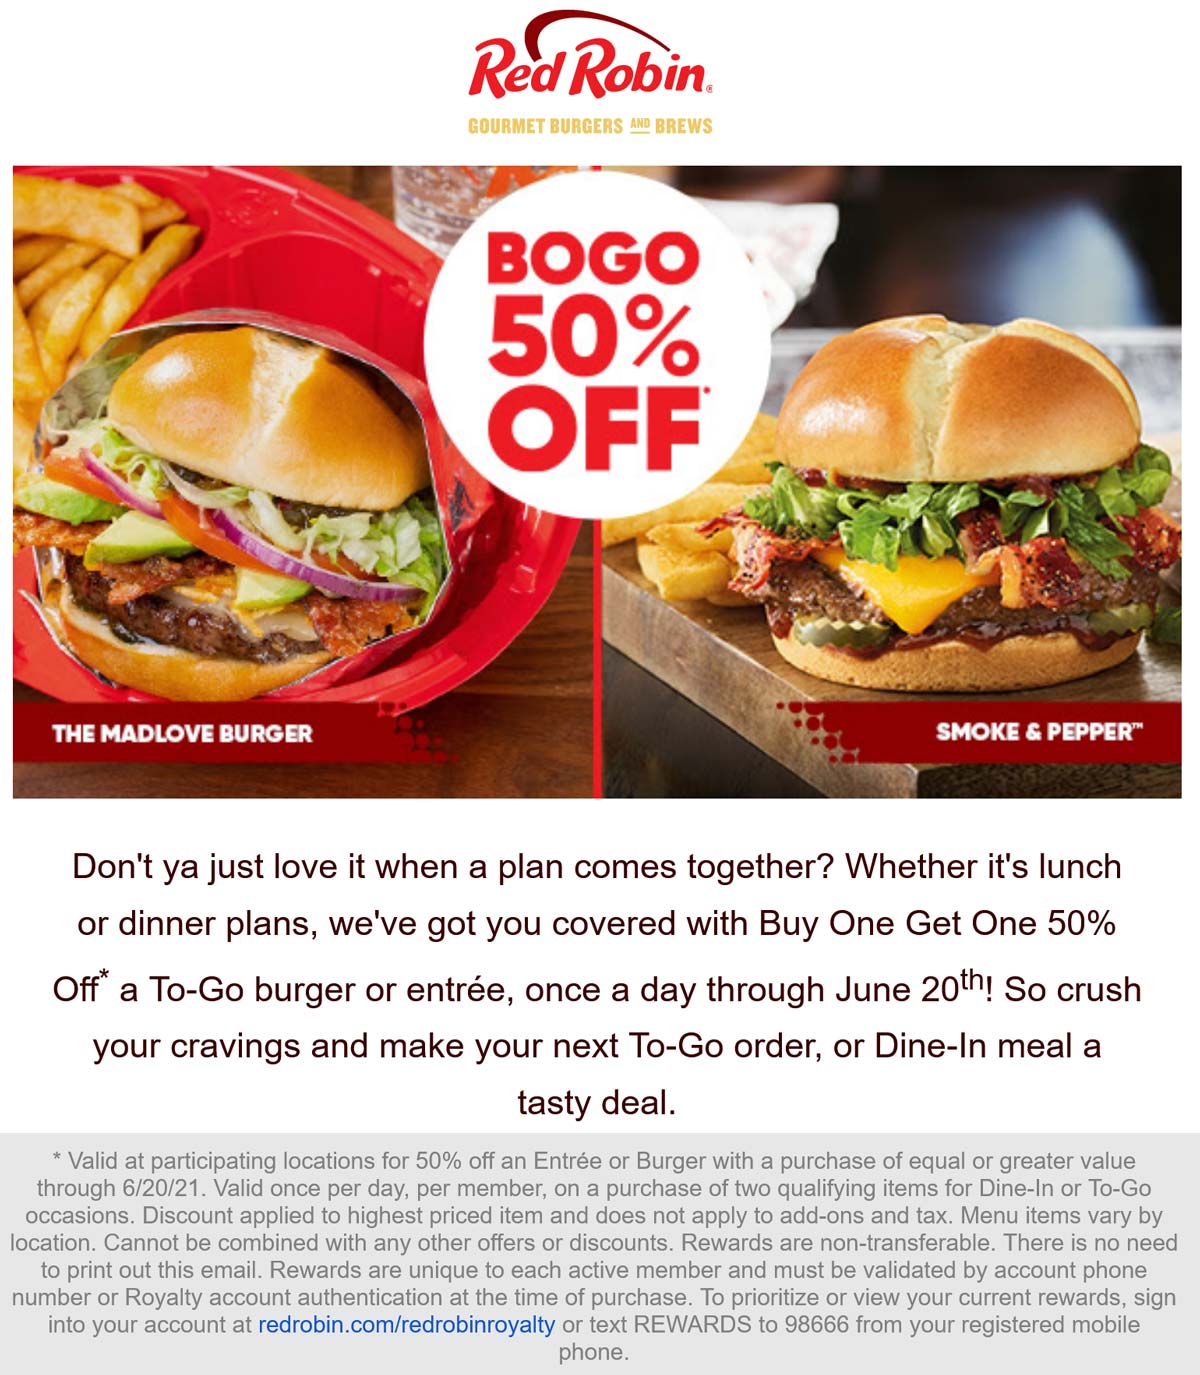 Red Robin restaurants Coupon  Second entree or burger 50% off at Red Robin #redrobin 